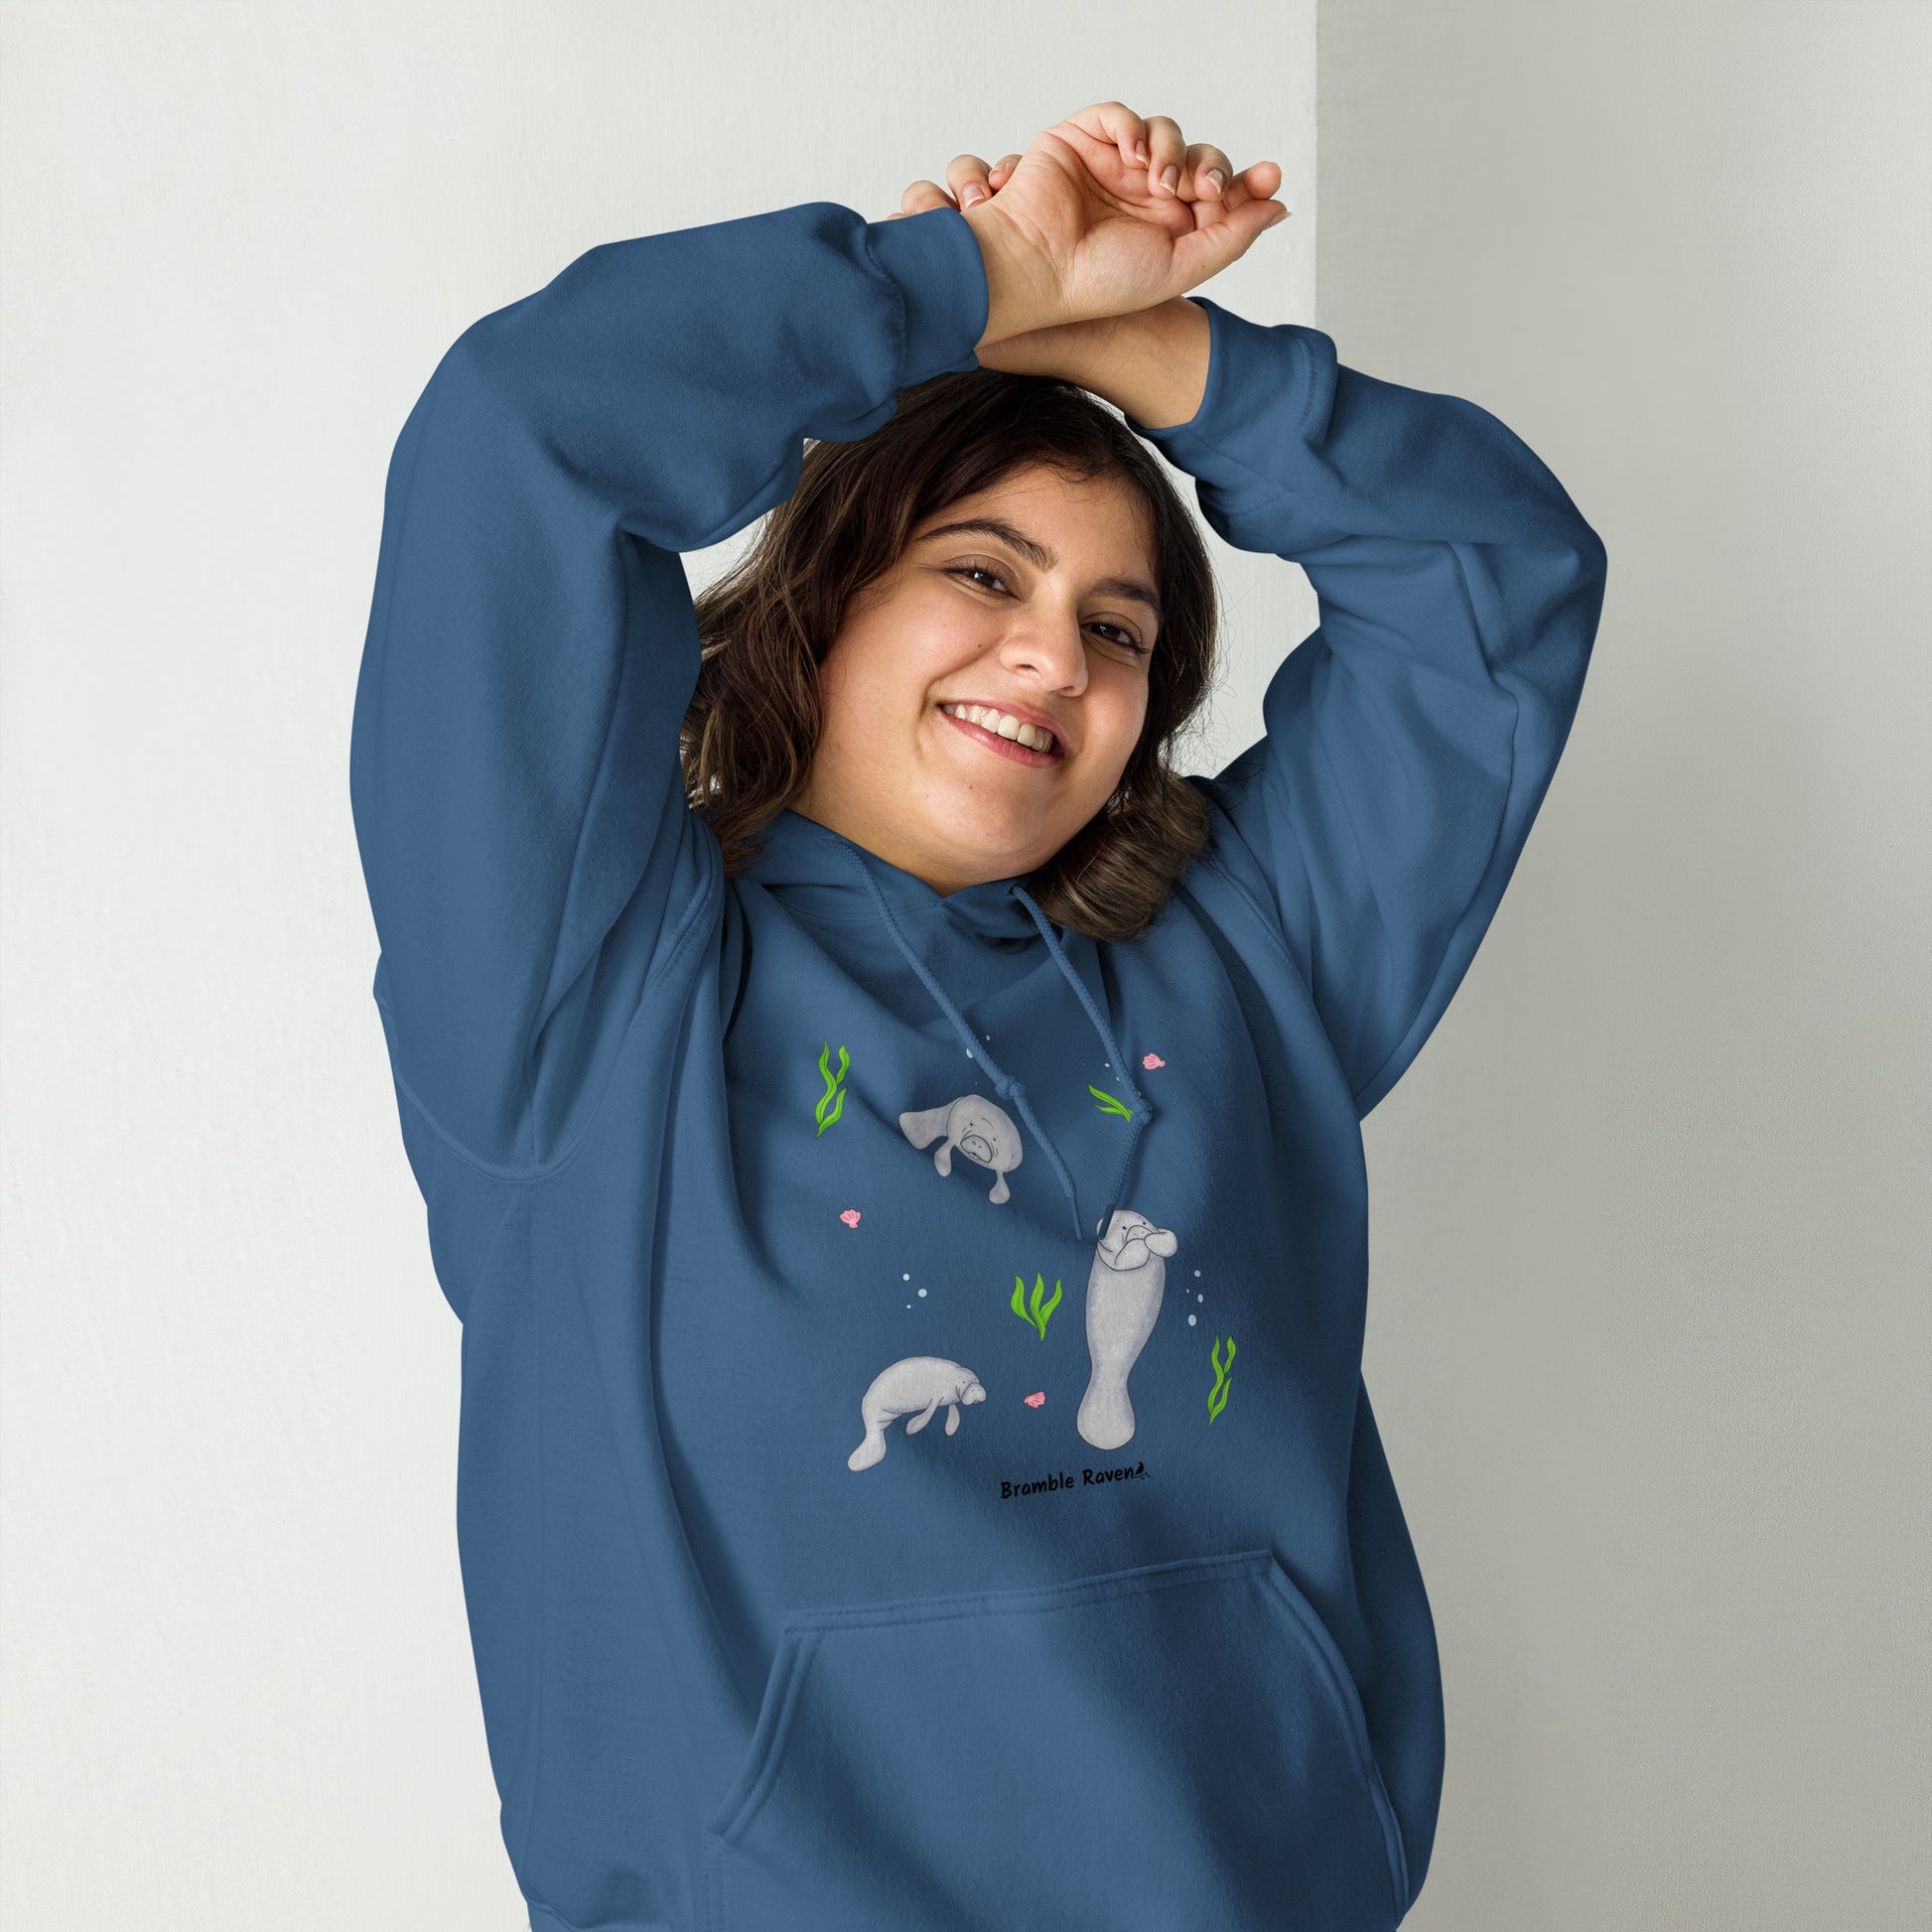 Indigo blue colored unisex hoodie. 50% cotton 50% polyester. Features a design of three manatees surrounded by seaweed, seashells, and bubbles. Has a double lined hood, ribbed cuffs, and a front pouch pocket. Shown on female model.